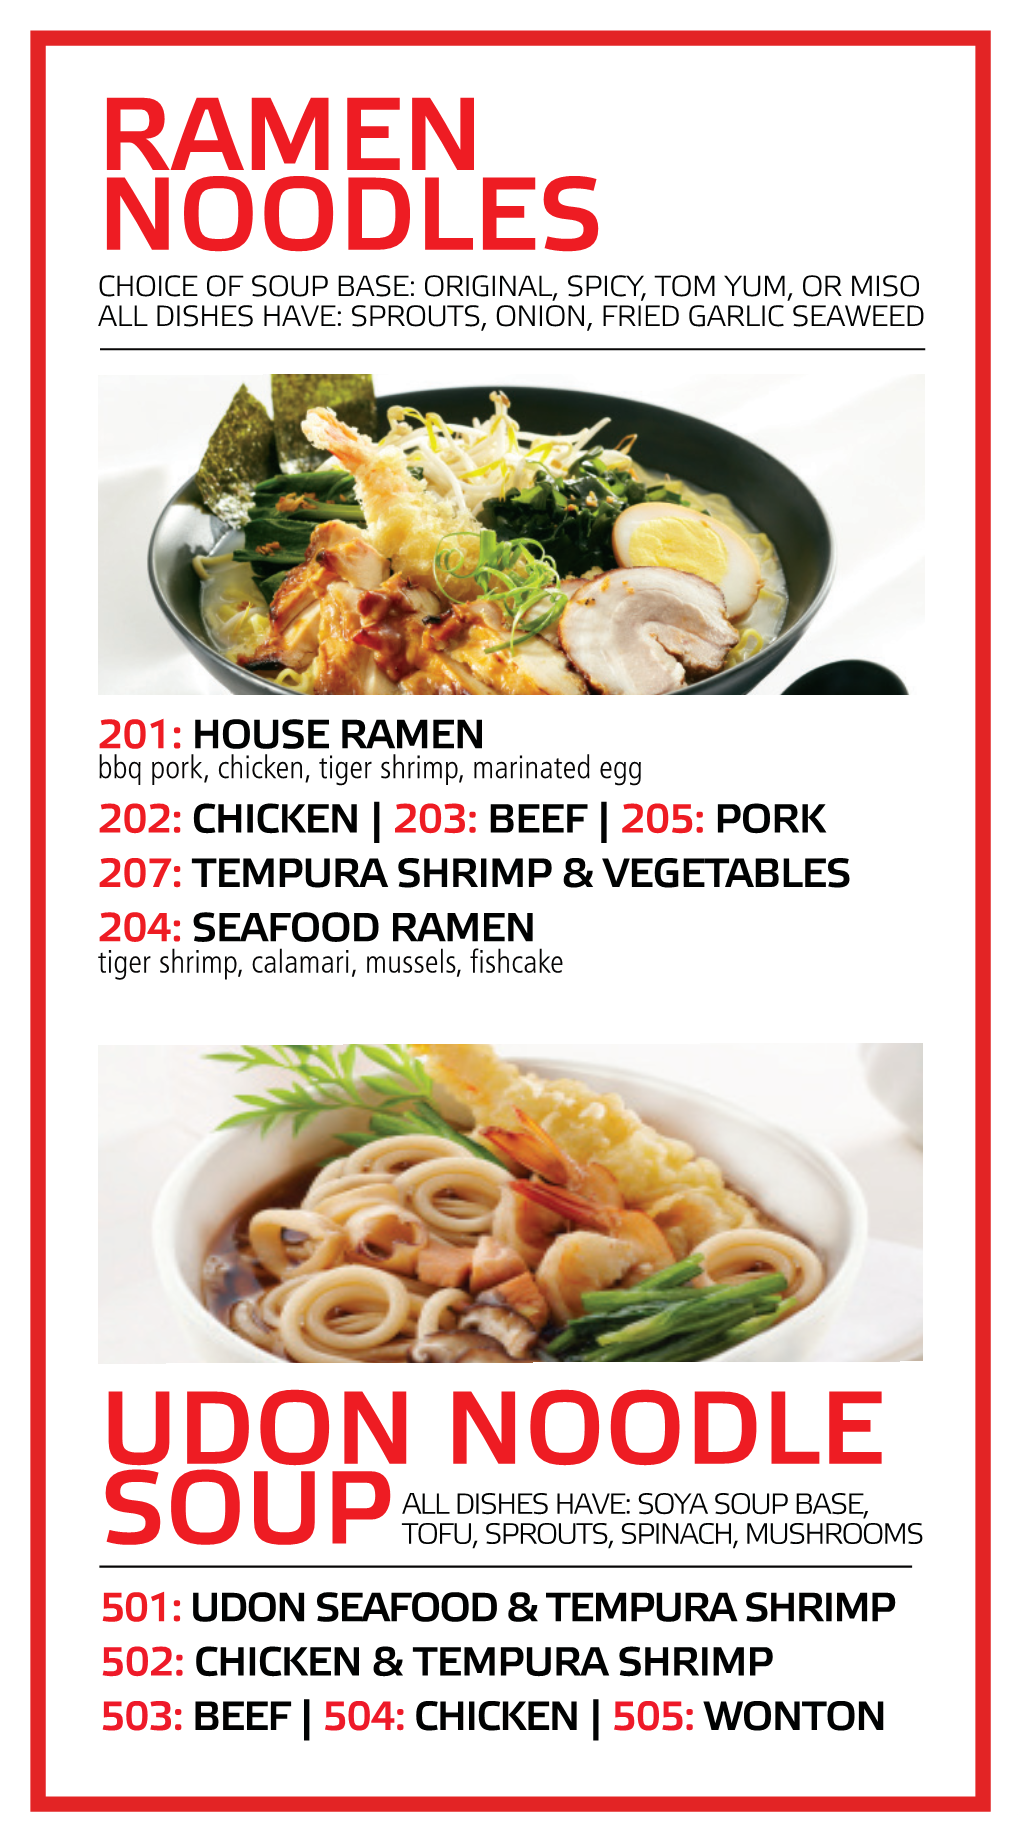 Ramen Noodles Choice of Soup Base: Original, Spicy, Tom Yum, Or Miso All Dishes Have: Sprouts, Onion, Fried Garlic Seaweed